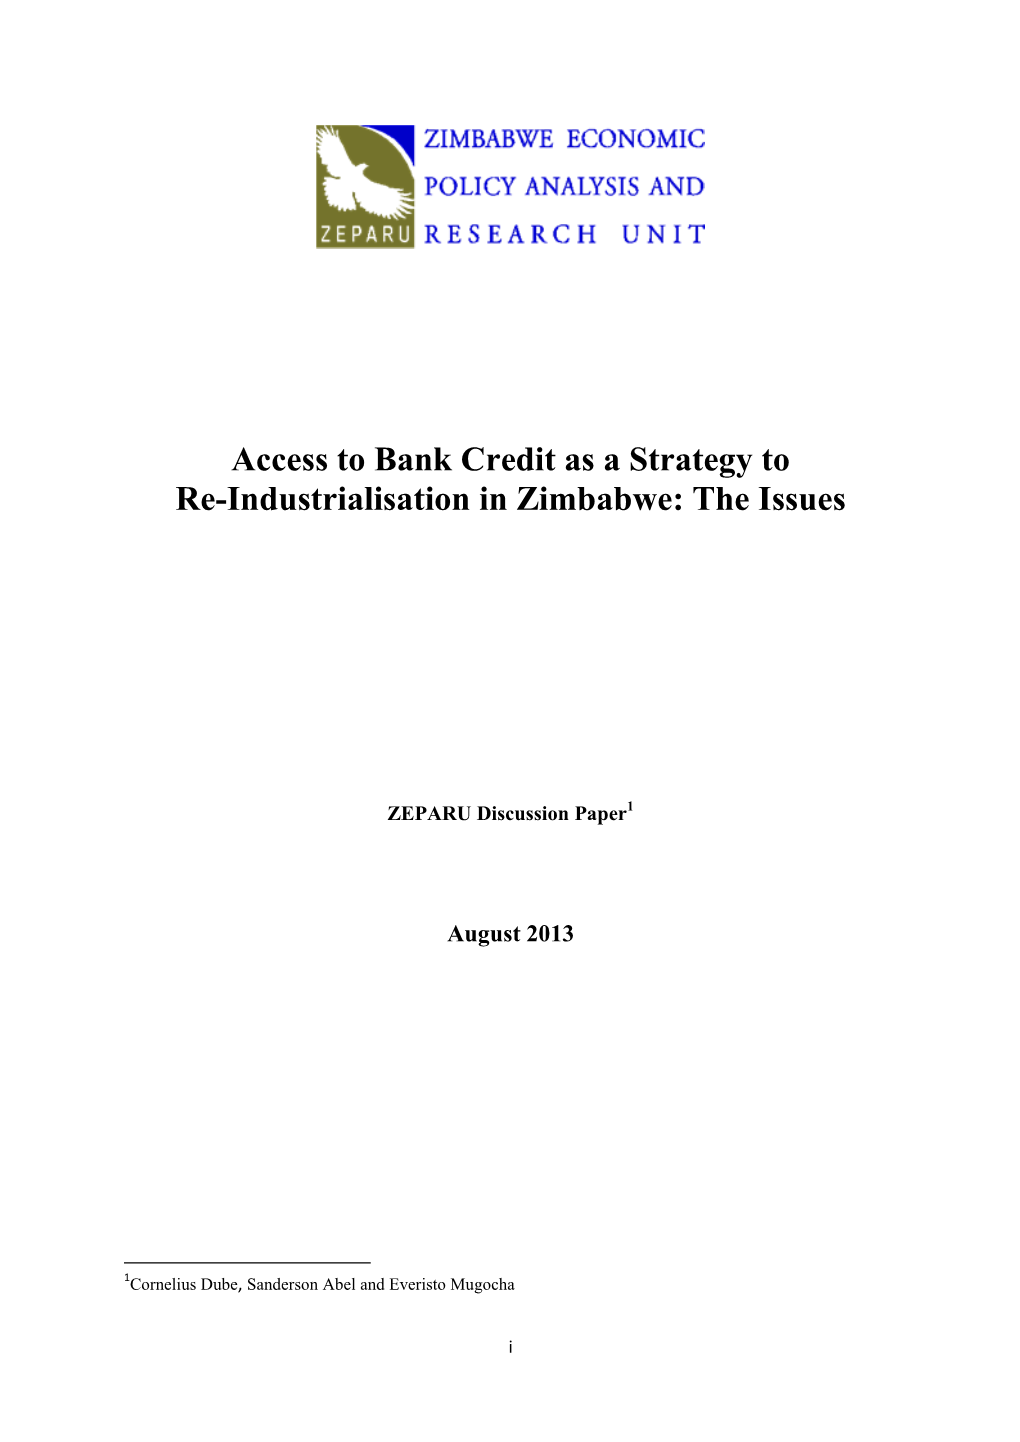 Access to Bank Credit As a Strategy to Re-Industrialisation in Zimbabwe: the Issues